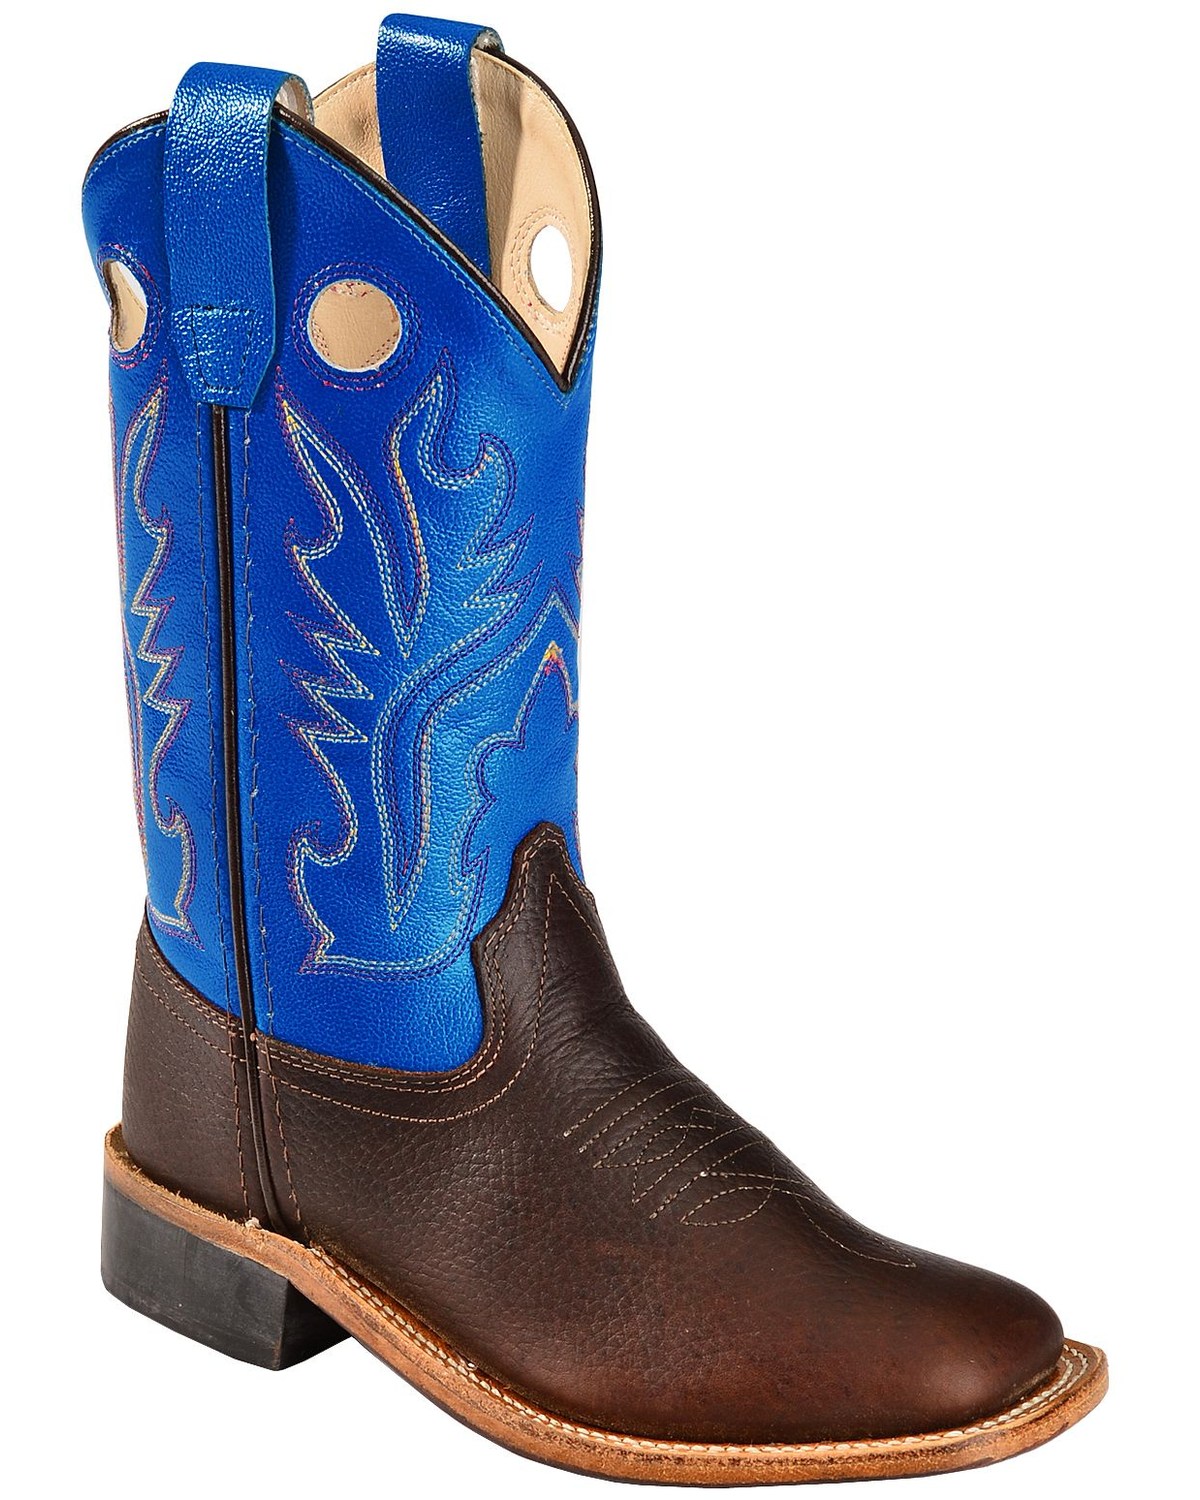 Cody James Little Boys' Thunder Western Boots - Broad Square Toe